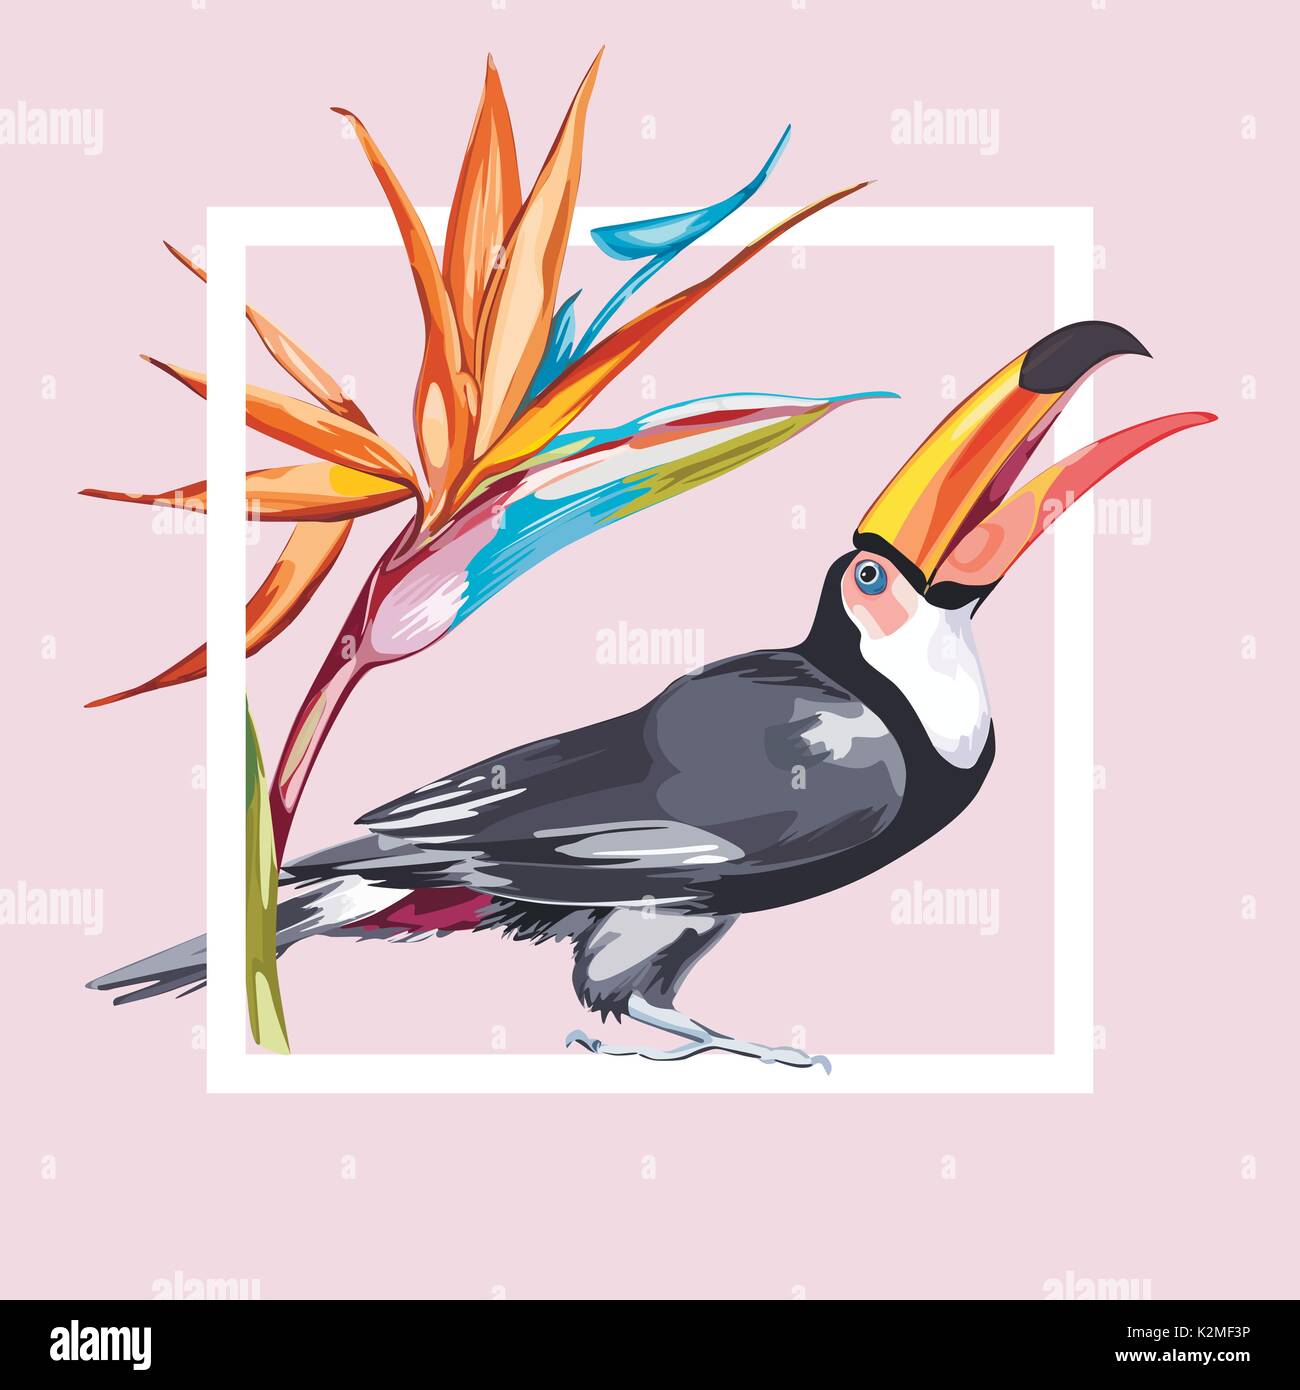 Toucan with tropical flowers strelitzia. Element for design of invitations, movie posters, fabrics and other objects. Isolated on white. Stock Vector